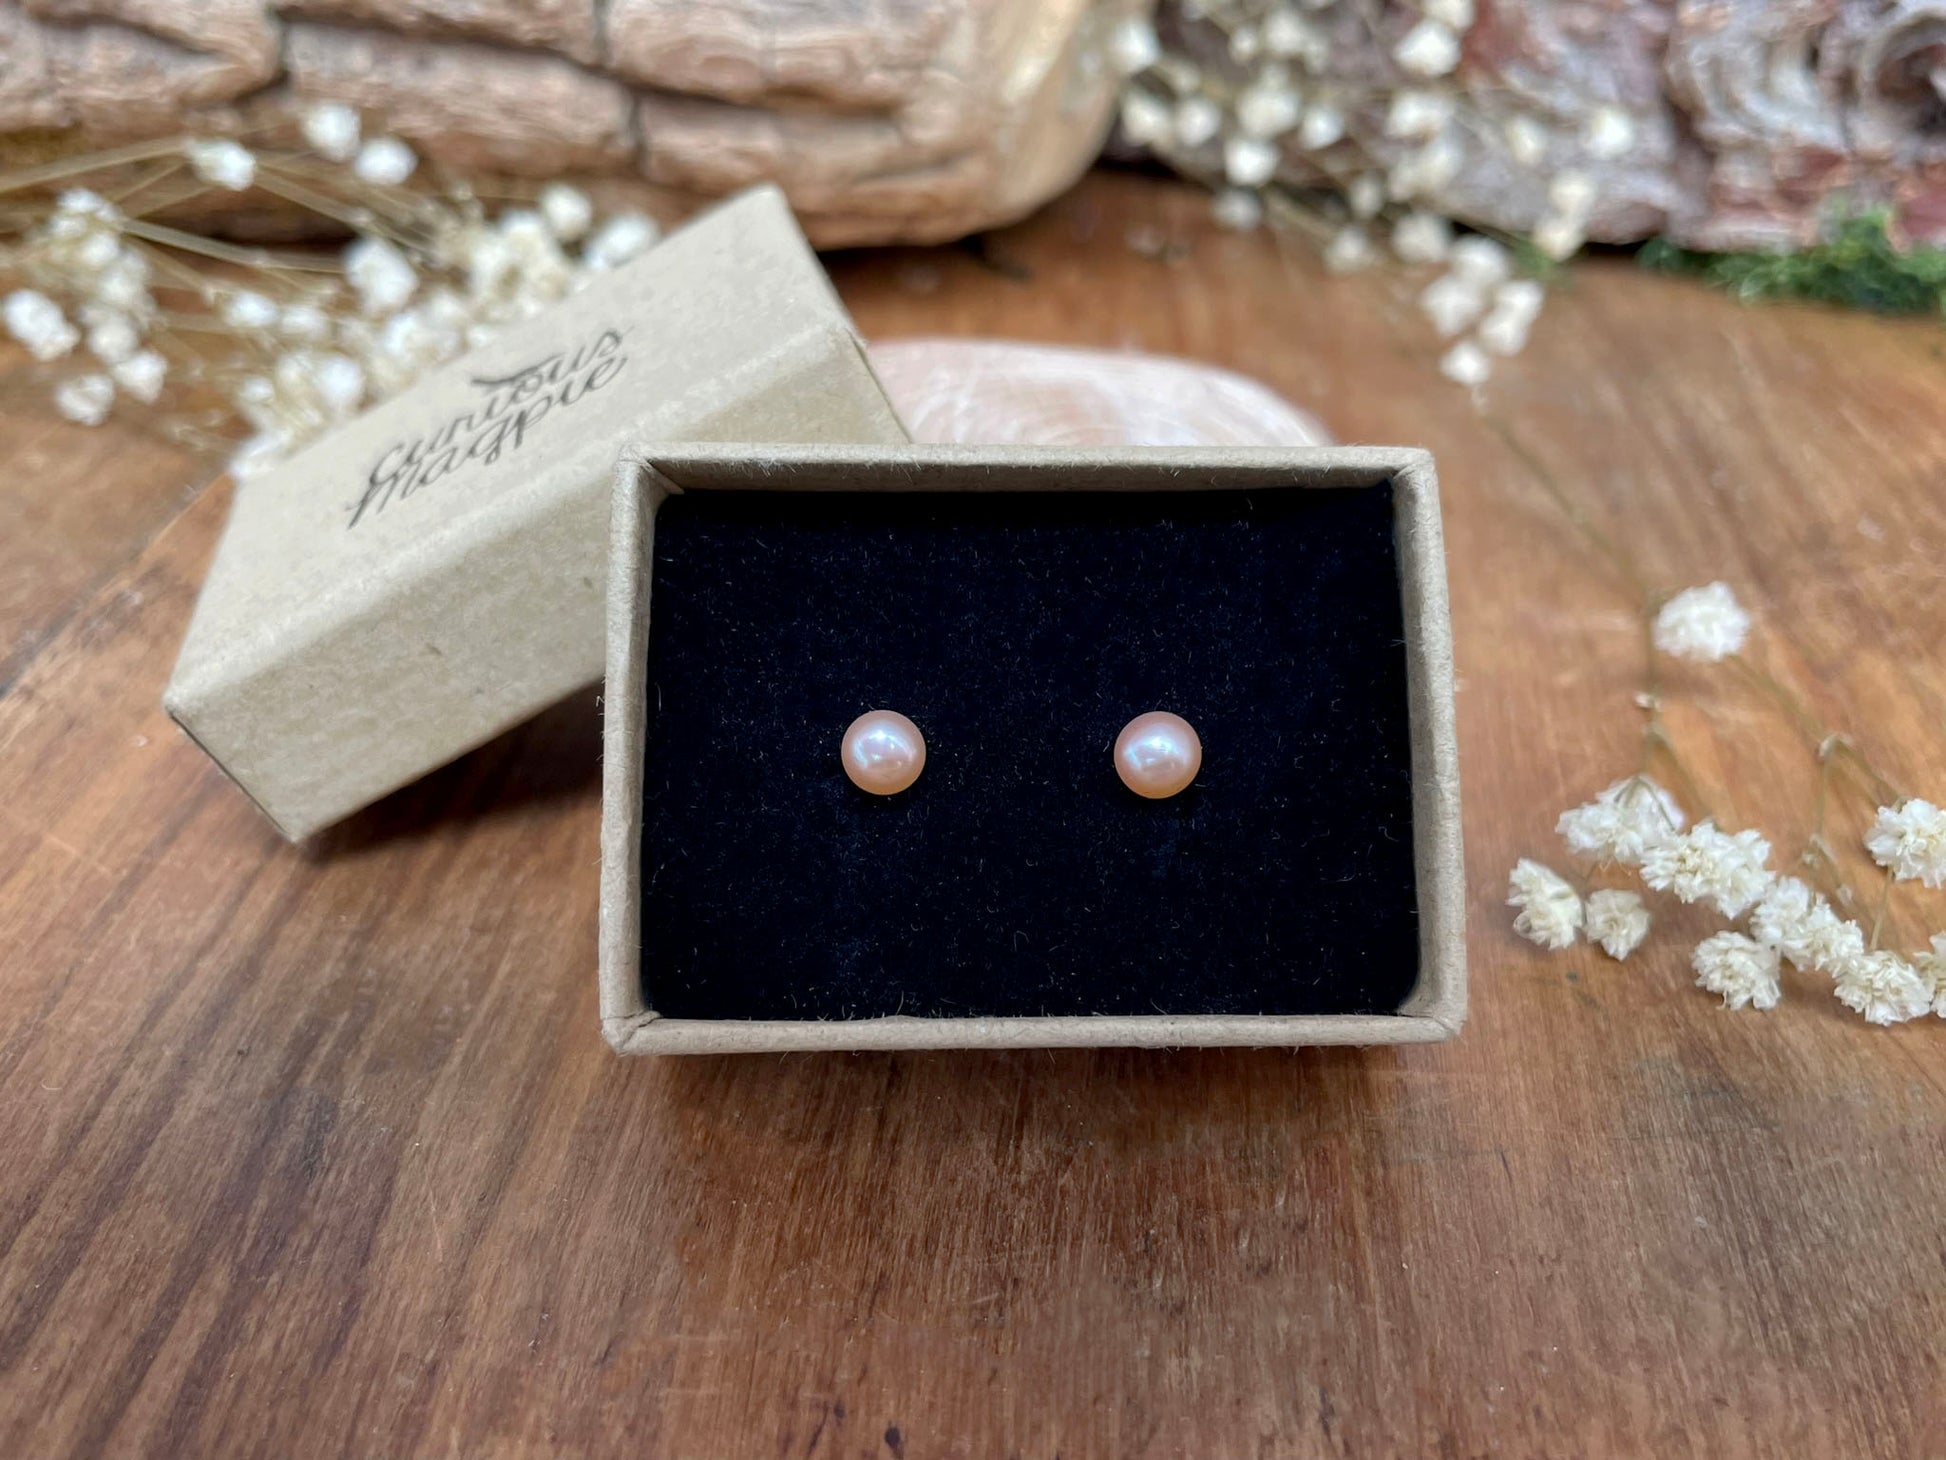 Apricot Pixie Pearl Stud Earrings by Curious Magpie Jewellery